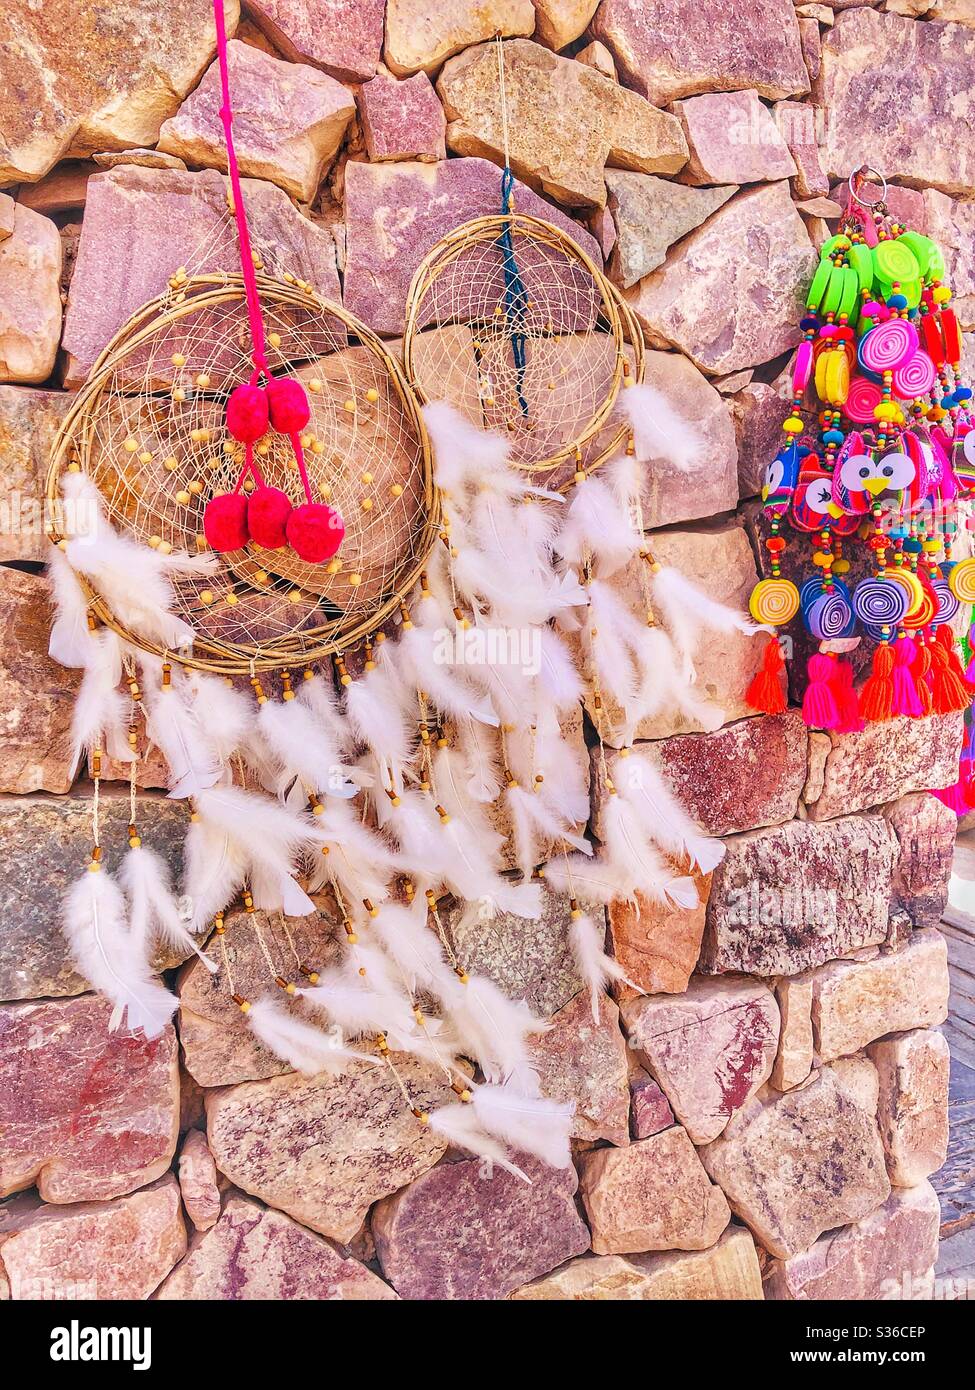 Local handicrafts sold as souvenirs in a Northern Argentinian desert town, Purmamarca. Stock Photo